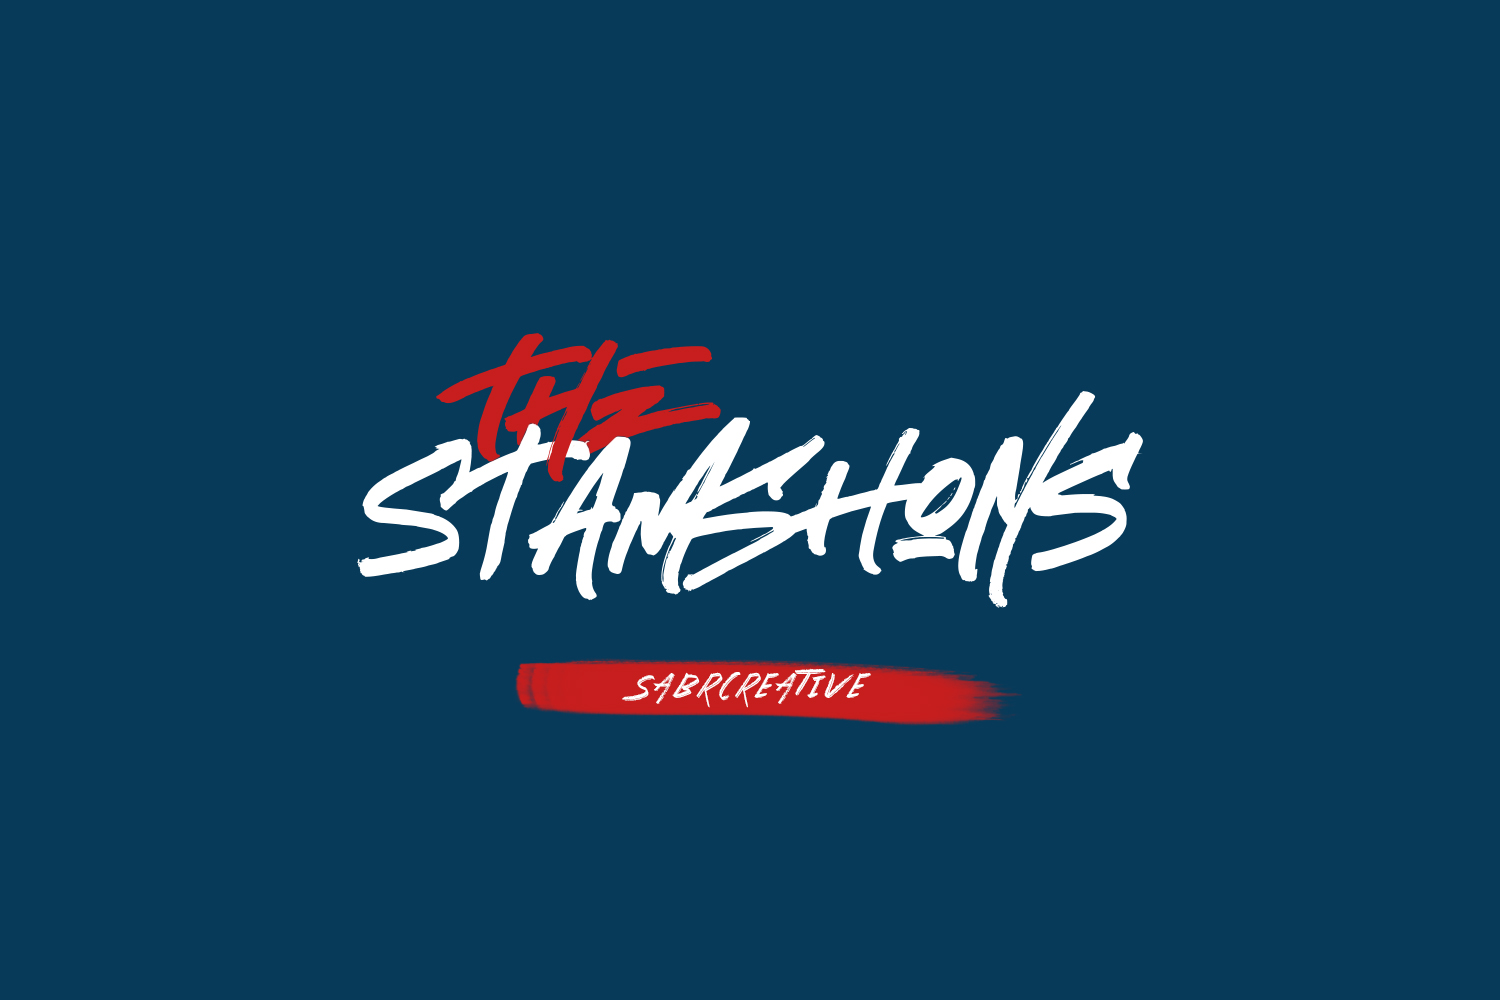 The Stamshons